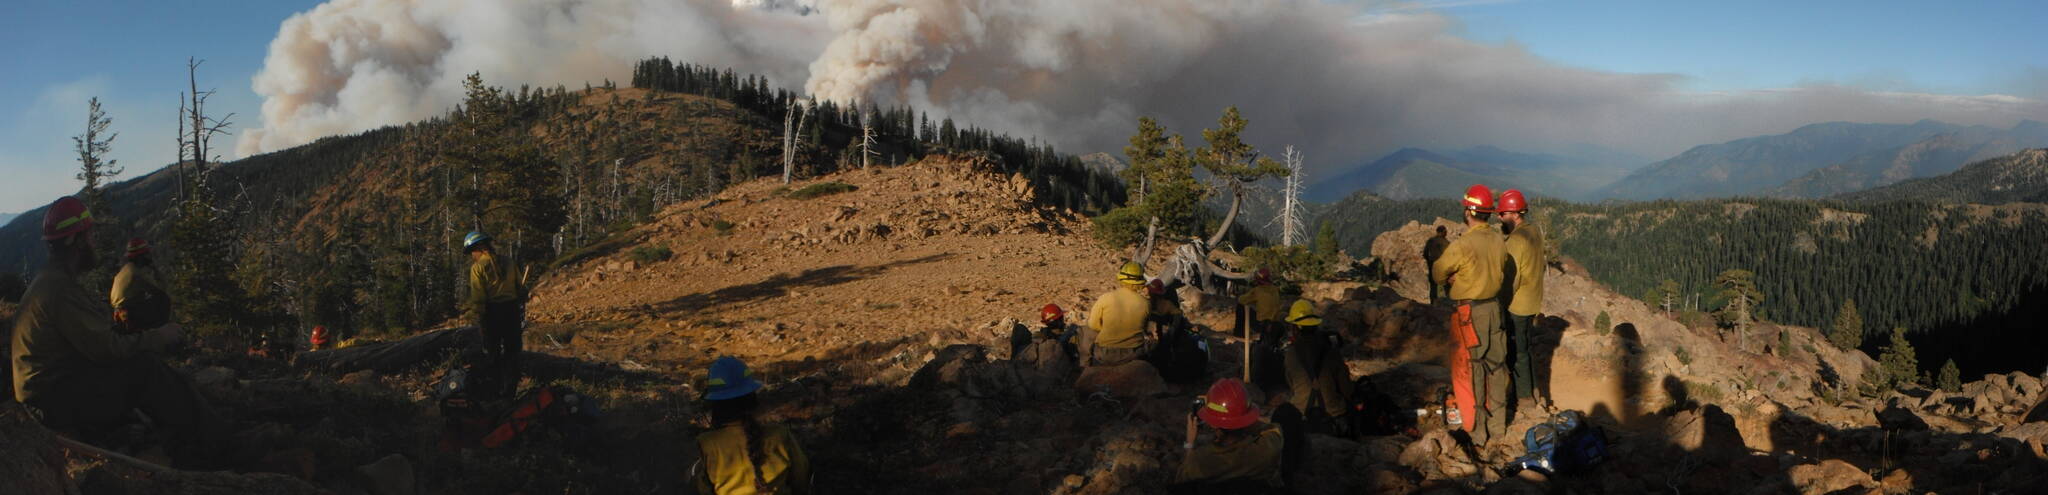 Courtesy photo / U.S. Forest Service 
A Forest Service fire crew surveys a break in a ridgeline during an operation. Fire crews from Alaska are frequently deployed to the Lower 48 to help combat wildfires that are growing larger and closer to urban areas in many cases.